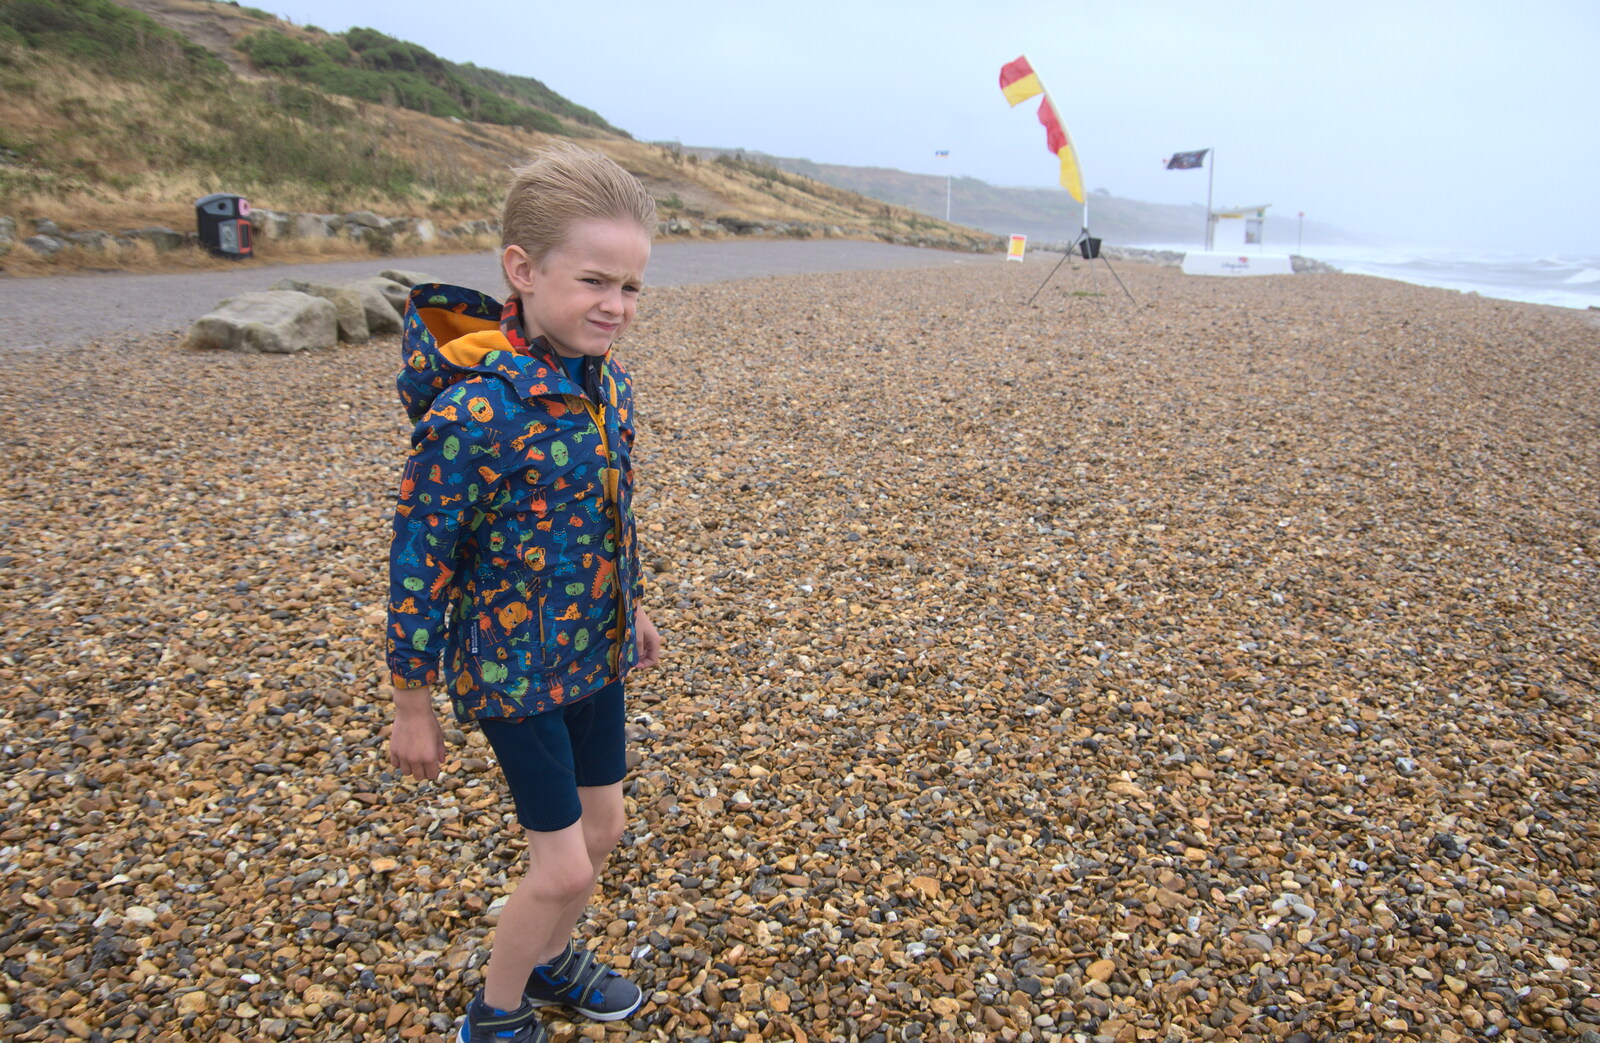 Harry struggles in the wind from Blustery Beach Trips, Walkford and Highcliffe, Dorset - 29th July 2018